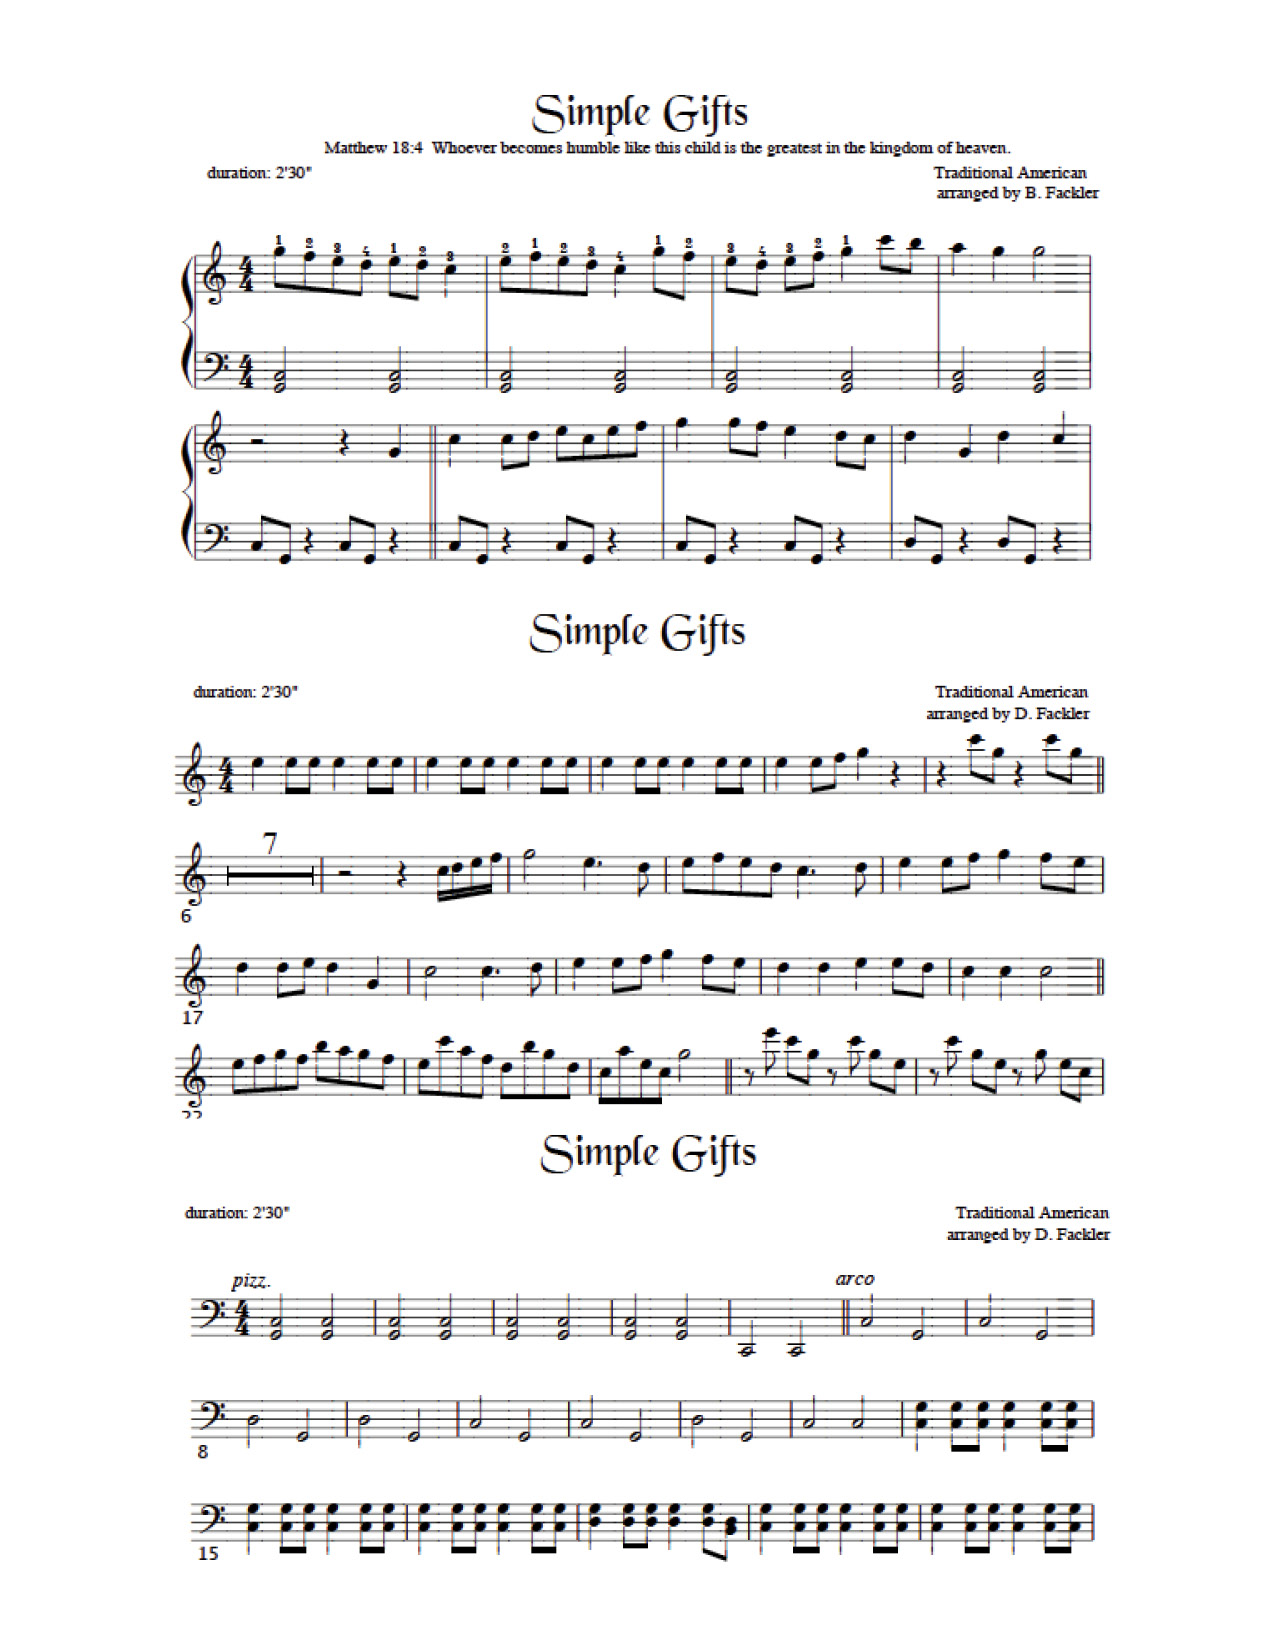 supplemental bass clef part for Simple Gifts, cello